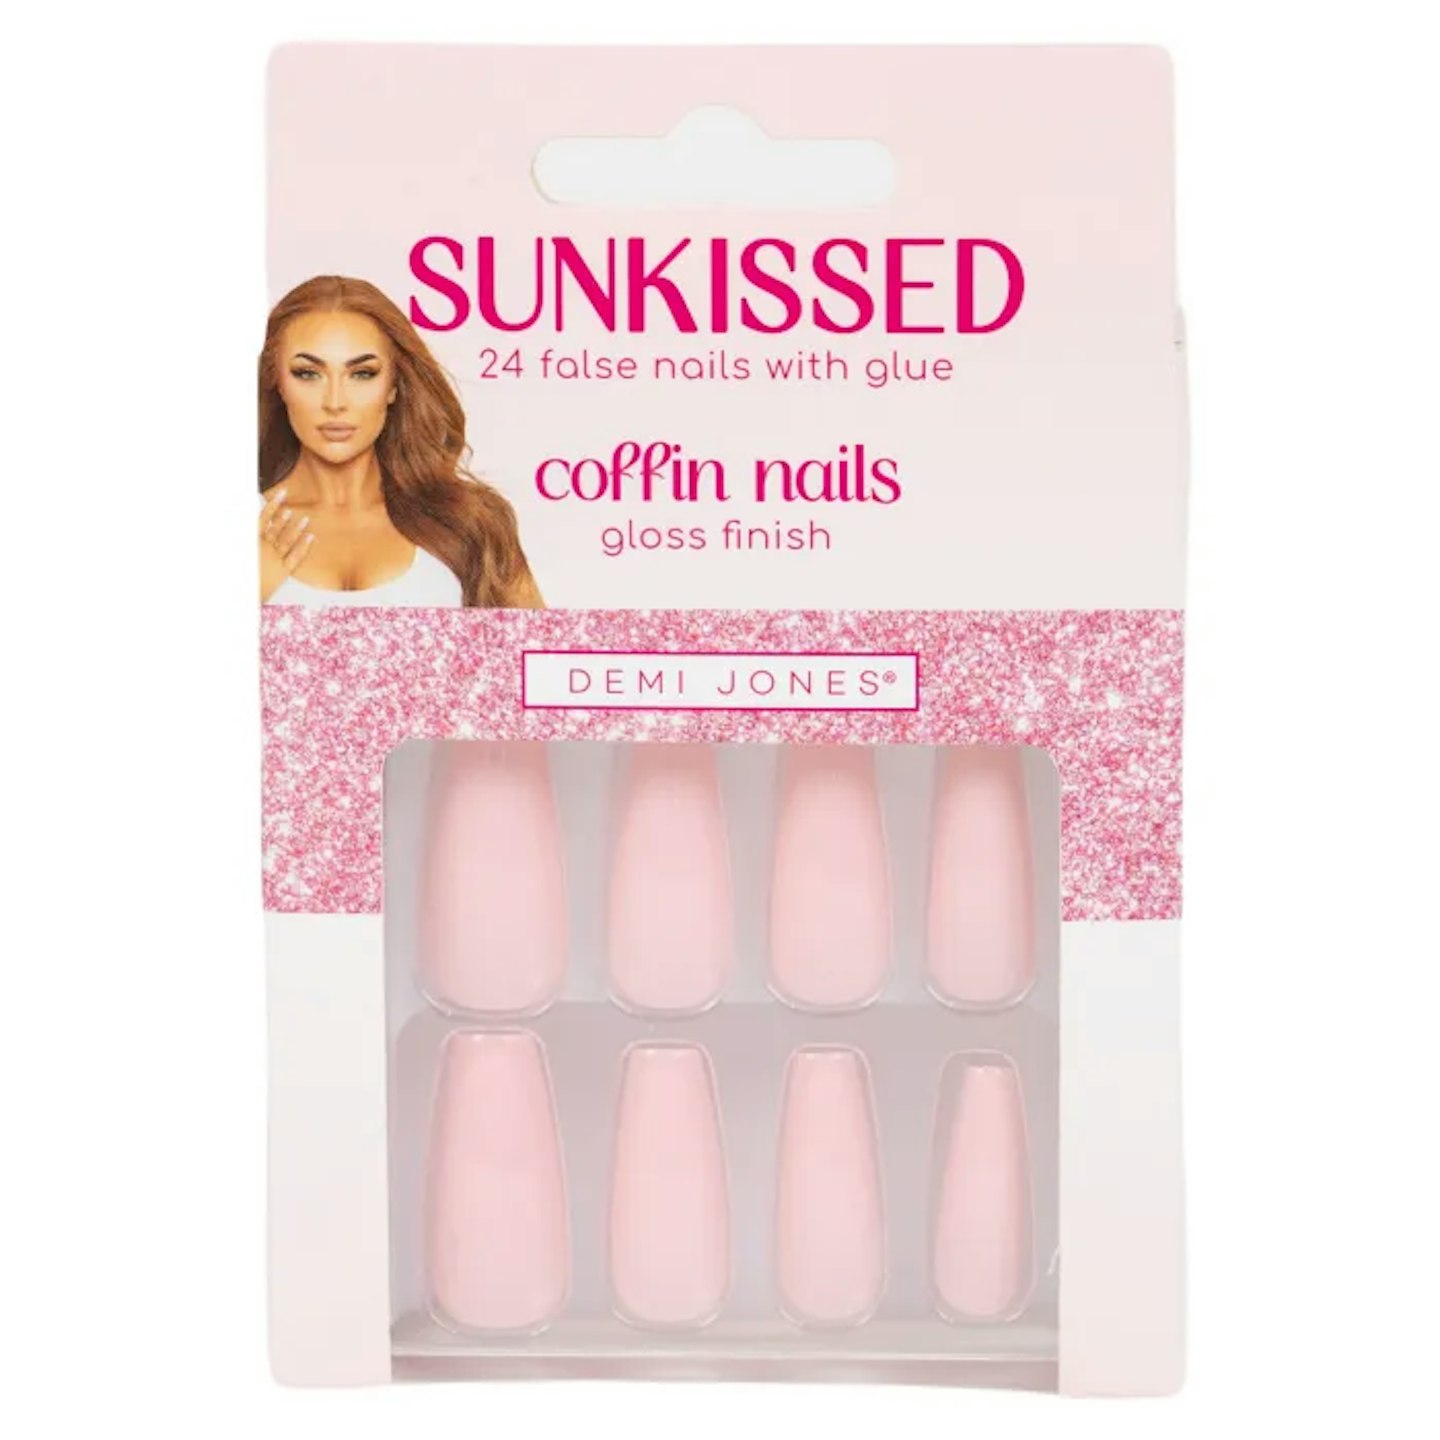 Demi Jones False Coffin Nails Gloss Finish (Pack of 24) in Sunkissed